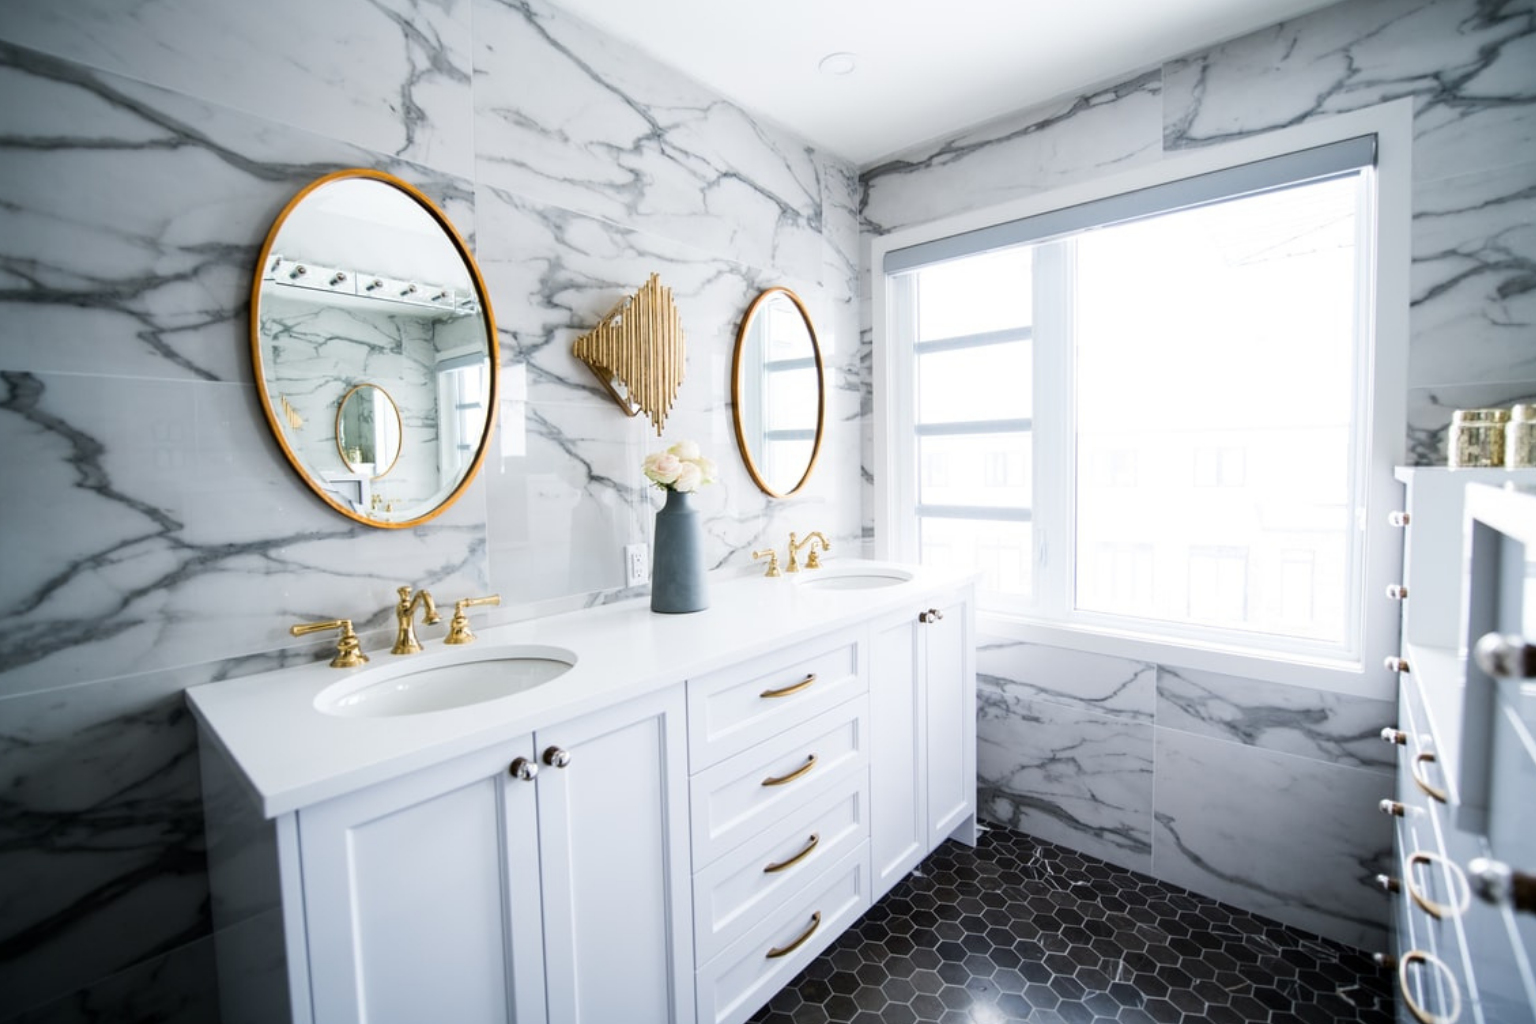 How to choose a vanity for your bathroom